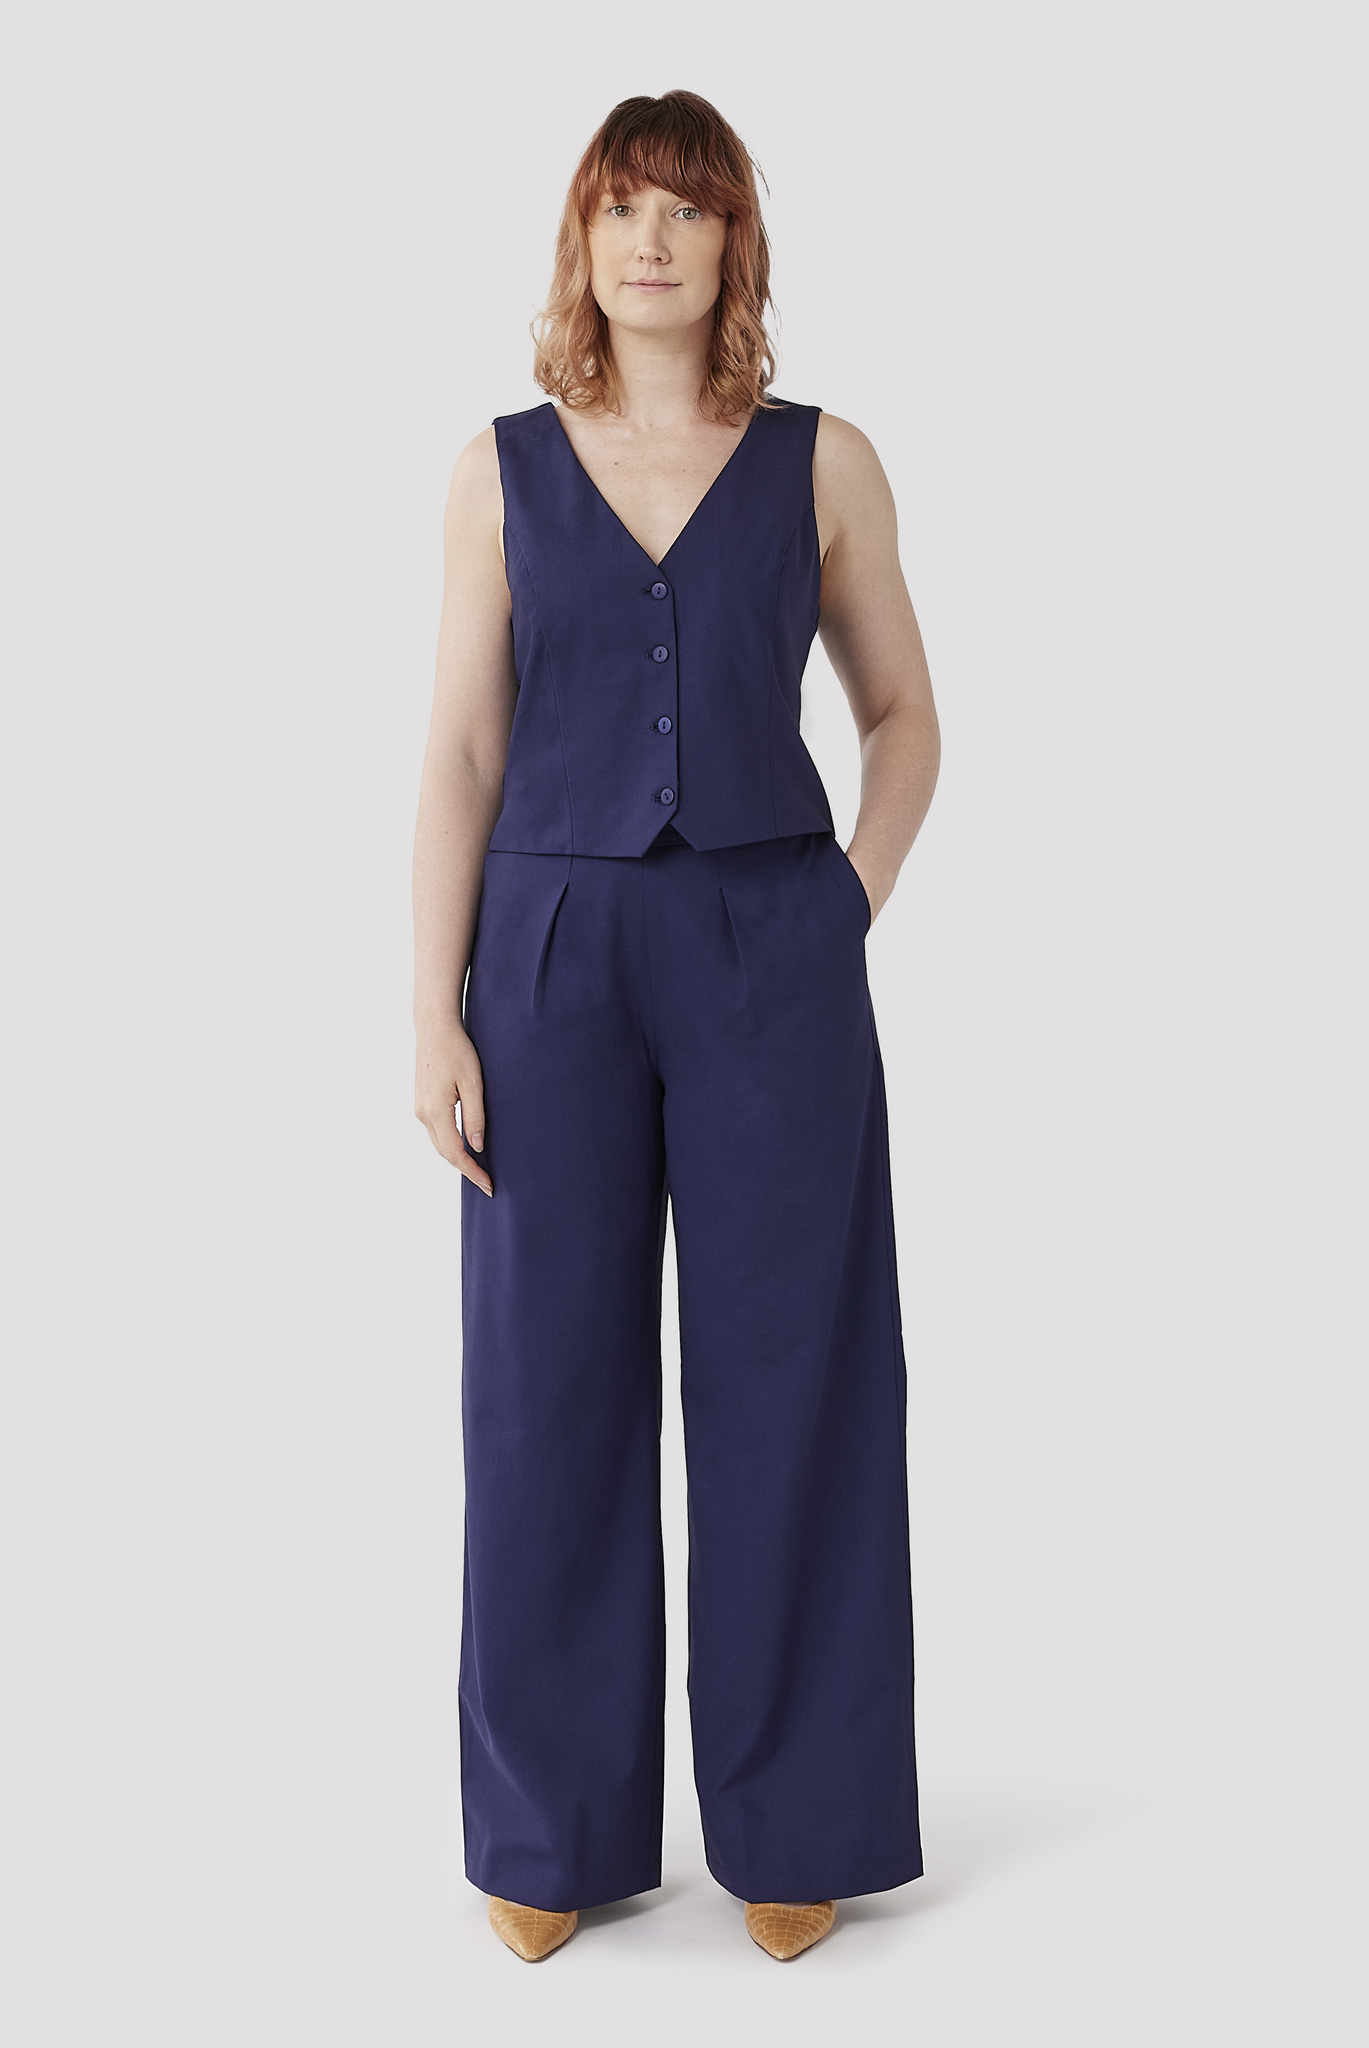 The Wool Vest is designed to pair perfectly with The Wool Wide Leg Pant by Aam. The two form a matching co-ord set, which is depicted here.